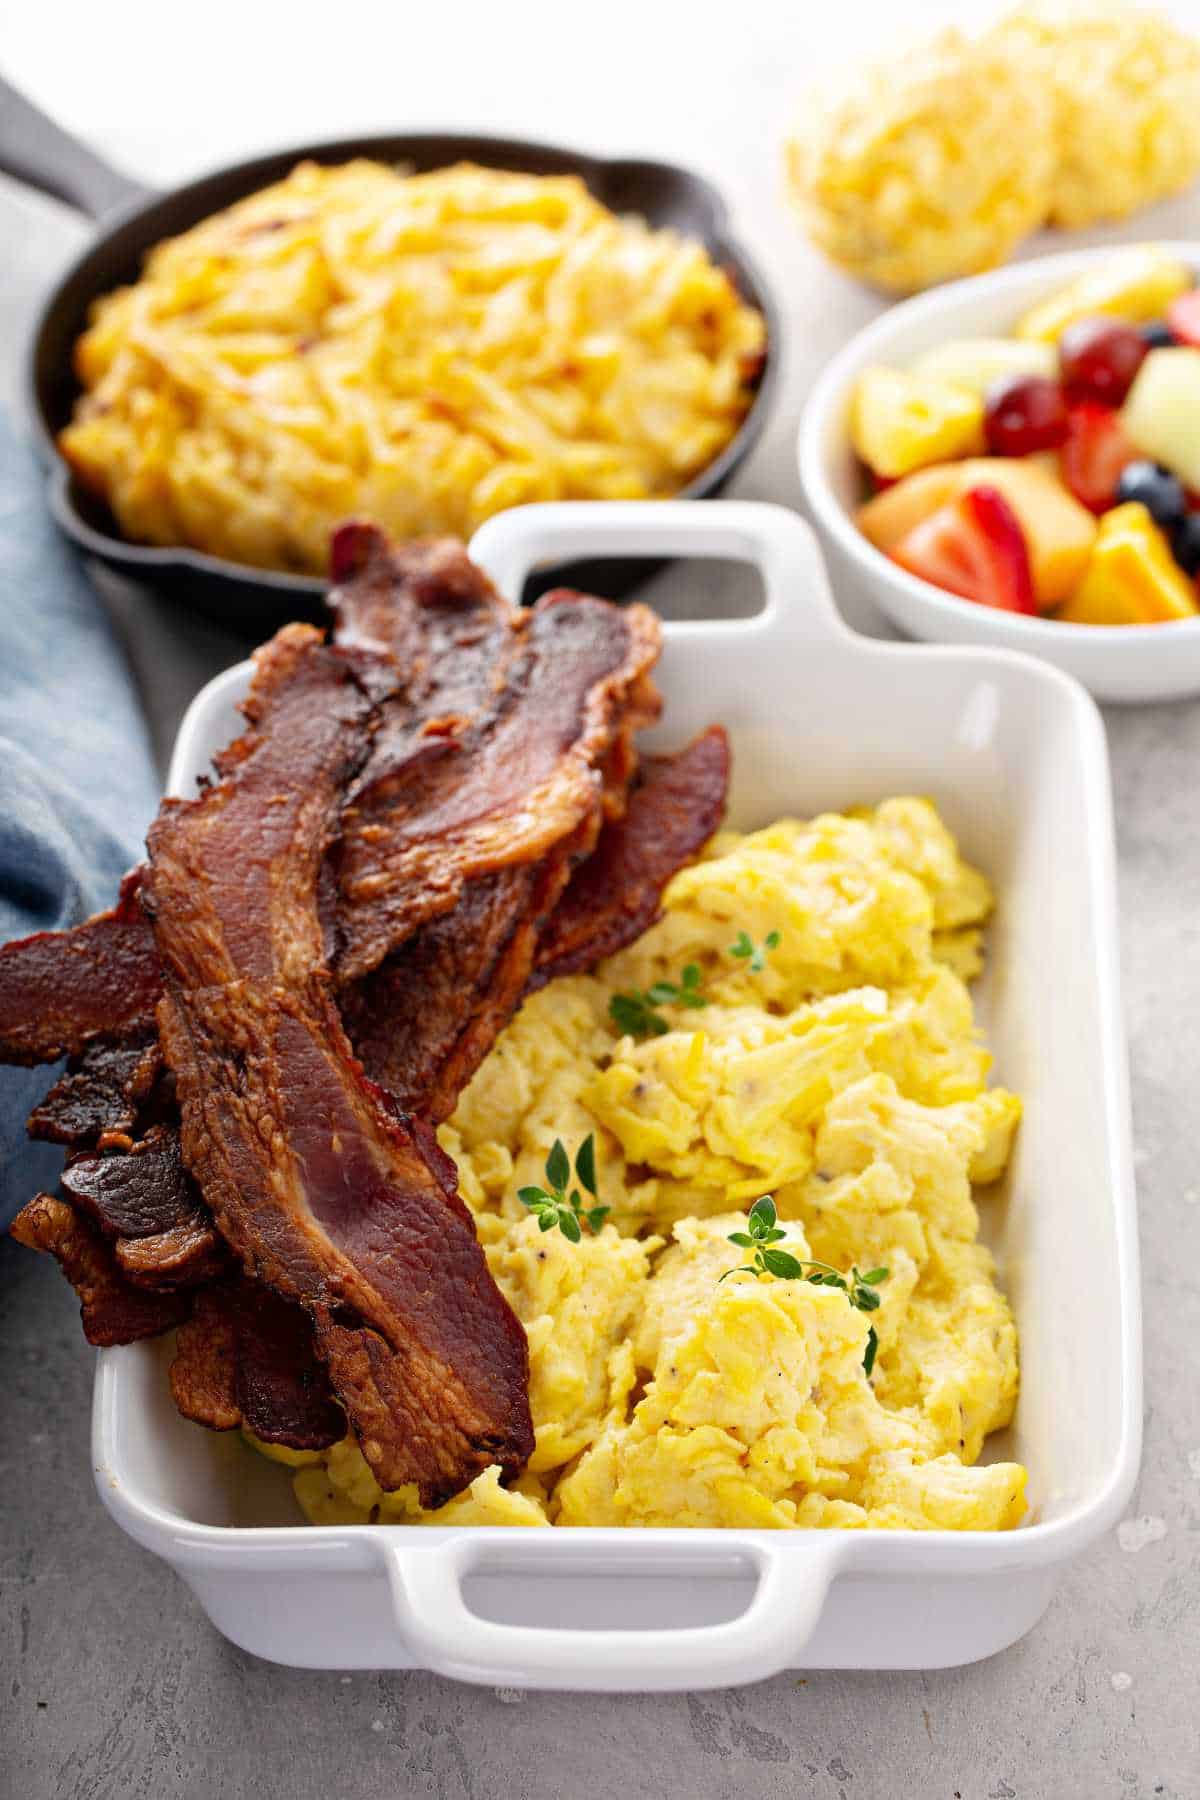 Full brunch with scrambled eggs, bacon and hash brown potatoes.